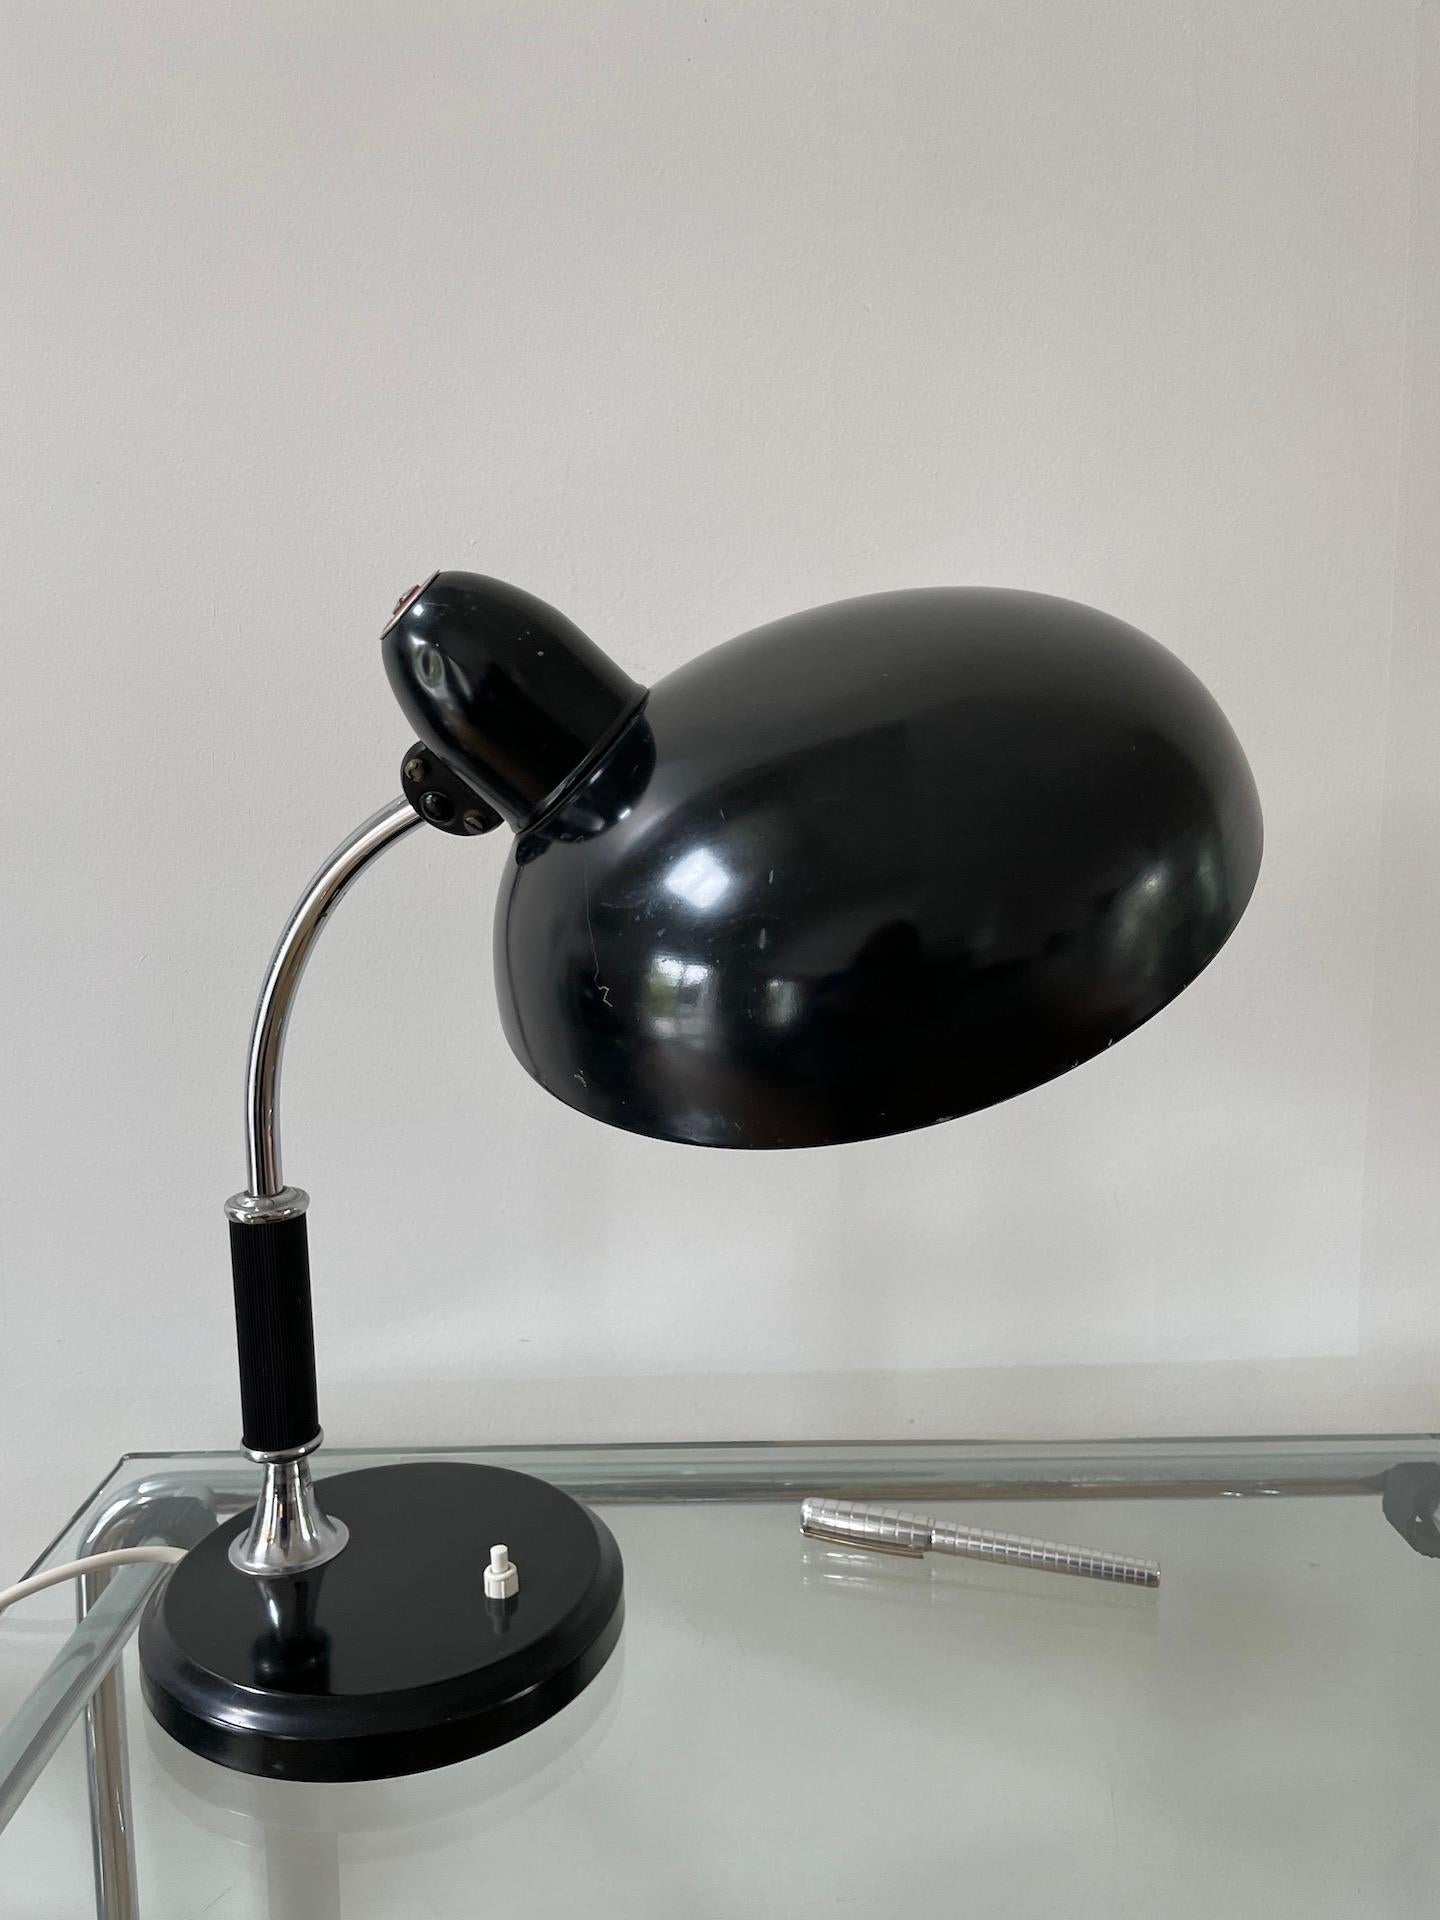 Black metal and chromed table light by Helo Leuchten, circa 1945.

With a sleek design reminding the Bauhaus period this table lamp is modern and functional. The shade is articulated enabling to swivel it frontwards, backwards and sideways.

The